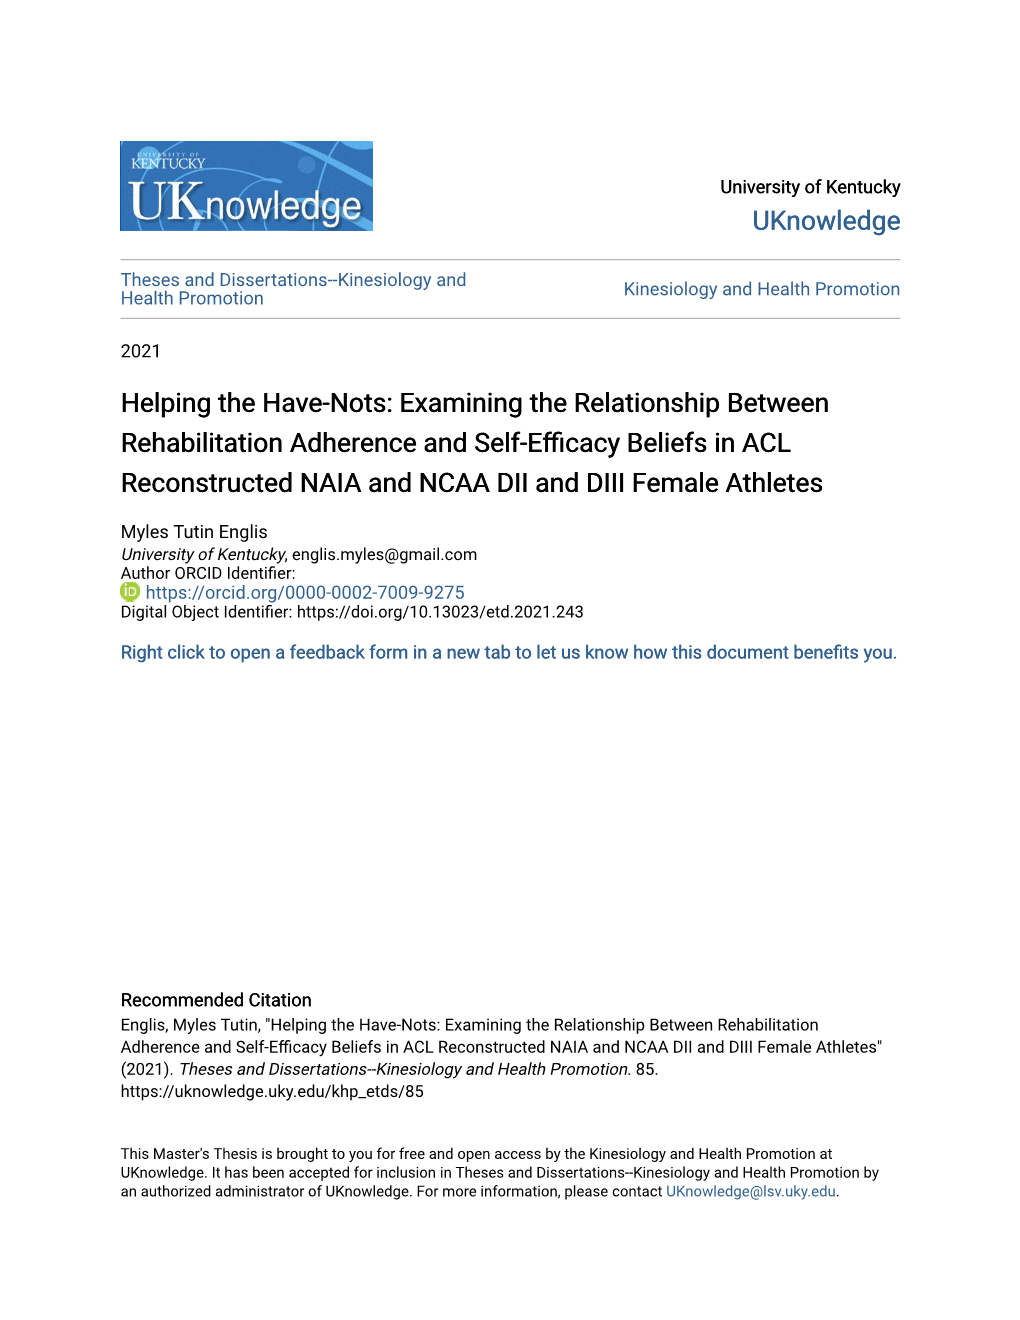 Helping the Have-Nots: Examining the Relationship Between Rehabilitation Adherence and Self-Efficacy Beliefs in ACL Reconstructe